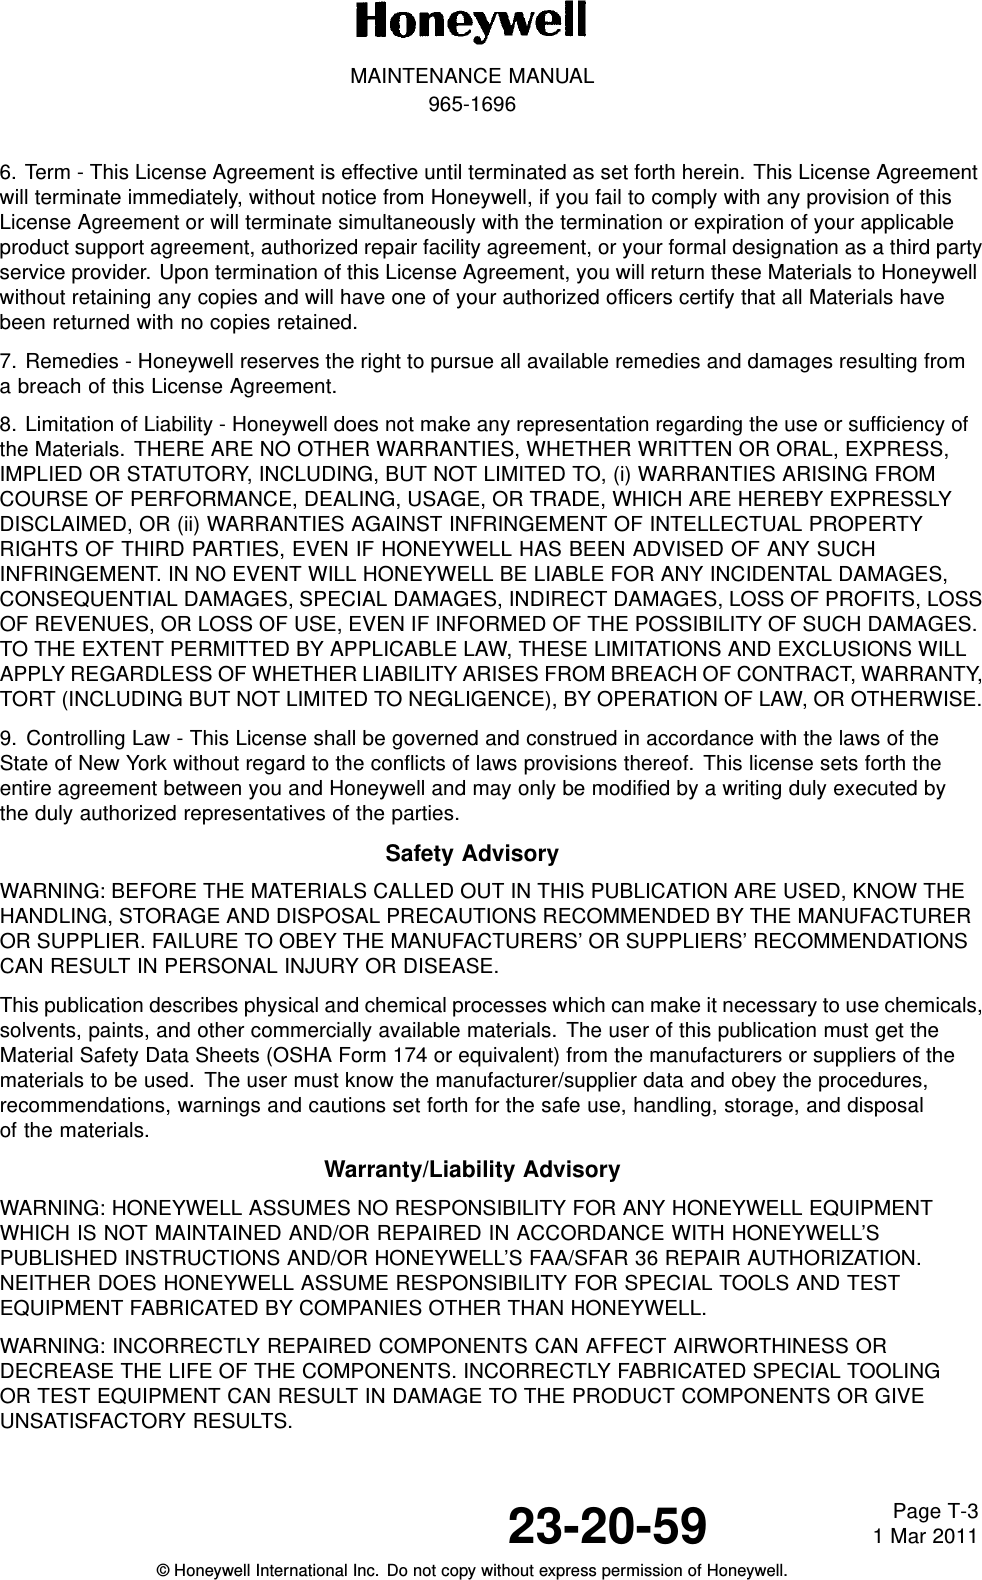 MAINTENANCE MANUAL965-16966. Term - This License Agreement is effective until terminated as set forth herein. This License Agreementwill terminate immediately, without notice from Honeywell, if you fail to comply with any provision of thisLicense Agreement or will terminate simultaneously with the termination or expiration of your applicableproduct support agreement, authorized repair facility agreement, or your formal designation as a third partyservice provider. Upon termination of this License Agreement, you will return these Materials to Honeywellwithout retaining any copies and will have one of your authorized officers certify that all Materials havebeen returned with no copies retained.7. Remedies - Honeywell reserves the right to pursue all available remedies and damages resulting froma breach of this License Agreement.8. Limitation of Liability - Honeywell does not make any representation regarding the use or sufficiency ofthe Materials. THERE ARE NO OTHER WARRANTIES, WHETHER WRITTEN OR ORAL, EXPRESS,IMPLIED OR STATUTORY, INCLUDING, BUT NOT LIMITED TO, (i) WARRANTIES ARISING FROMCOURSE OF PERFORMANCE, DEALING, USAGE, OR TRADE, WHICH ARE HEREBY EXPRESSLYDISCLAIMED, OR (ii) WARRANTIES AGAINST INFRINGEMENT OF INTELLECTUAL PROPERTYRIGHTS OF THIRD PARTIES, EVEN IF HONEYWELL HAS BEEN ADVISED OF ANY SUCHINFRINGEMENT. IN NO EVENT WILL HONEYWELL BE LIABLE FOR ANY INCIDENTAL DAMAGES,CONSEQUENTIAL DAMAGES, SPECIAL DAMAGES, INDIRECT DAMAGES, LOSS OF PROFITS, LOSSOF REVENUES, OR LOSS OF USE, EVEN IF INFORMED OF THE POSSIBILITY OF SUCH DAMAGES.TO THE EXTENT PERMITTED BY APPLICABLE LAW, THESE LIMITATIONS AND EXCLUSIONS WILLAPPLY REGARDLESS OF WHETHER LIABILITY ARISES FROM BREACH OF CONTRACT, WARRANTY,TORT (INCLUDING BUT NOT LIMITED TO NEGLIGENCE), BY OPERATION OF LAW, OR OTHERWISE.9. Controlling Law - This License shall be governed and construed in accordance with the laws of theState of New York without regard to the conflicts of laws provisions thereof. This license sets forth theentire agreement between you and Honeywell and may only be modified by a writing duly executed bythe duly authorized representatives of the parties.Safety AdvisoryWARNING: BEFORE THE MATERIALS CALLED OUT IN THIS PUBLICATION ARE USED, KNOW THEHANDLING, STORAGE AND DISPOSAL PRECAUTIONS RECOMMENDED BY THE MANUFACTUREROR SUPPLIER. FAILURE TO OBEY THE MANUFACTURERS’ OR SUPPLIERS’ RECOMMENDATIONSCAN RESULT IN PERSONAL INJURY OR DISEASE.This publication describes physical and chemical processes which can make it necessary to use chemicals,solvents, paints, and other commercially available materials. The user of this publication must get theMaterial Safety Data Sheets (OSHA Form 174 or equivalent) from the manufacturers or suppliers of thematerials to be used. The user must know the manufacturer/supplier data and obey the procedures,recommendations, warnings and cautions set forth for the safe use, handling, storage, and disposalof the materials.Warranty/Liability AdvisoryWARNING: HONEYWELL ASSUMES NO RESPONSIBILITY FOR ANY HONEYWELL EQUIPMENTWHICH IS NOT MAINTAINED AND/OR REPAIRED IN ACCORDANCE WITH HONEYWELL’SPUBLISHED INSTRUCTIONS AND/OR HONEYWELL’S FAA/SFAR 36 REPAIR AUTHORIZATION.NEITHER DOES HONEYWELL ASSUME RESPONSIBILITY FOR SPECIAL TOOLS AND TESTEQUIPMENT FABRICATED BY COMPANIES OTHER THAN HONEYWELL.WARNING: INCORRECTLY REPAIRED COMPONENTS CAN AFFECT AIRWORTHINESS ORDECREASE THE LIFE OF THE COMPONENTS. INCORRECTLY FABRICATED SPECIAL TOOLINGOR TEST EQUIPMENT CAN RESULT IN DAMAGE TO THE PRODUCT COMPONENTS OR GIVEUNSATISFACTORY RESULTS.23-20-59 Page T-31 Mar 2011© Honeywell International Inc. Do not copy without express permission of Honeywell.